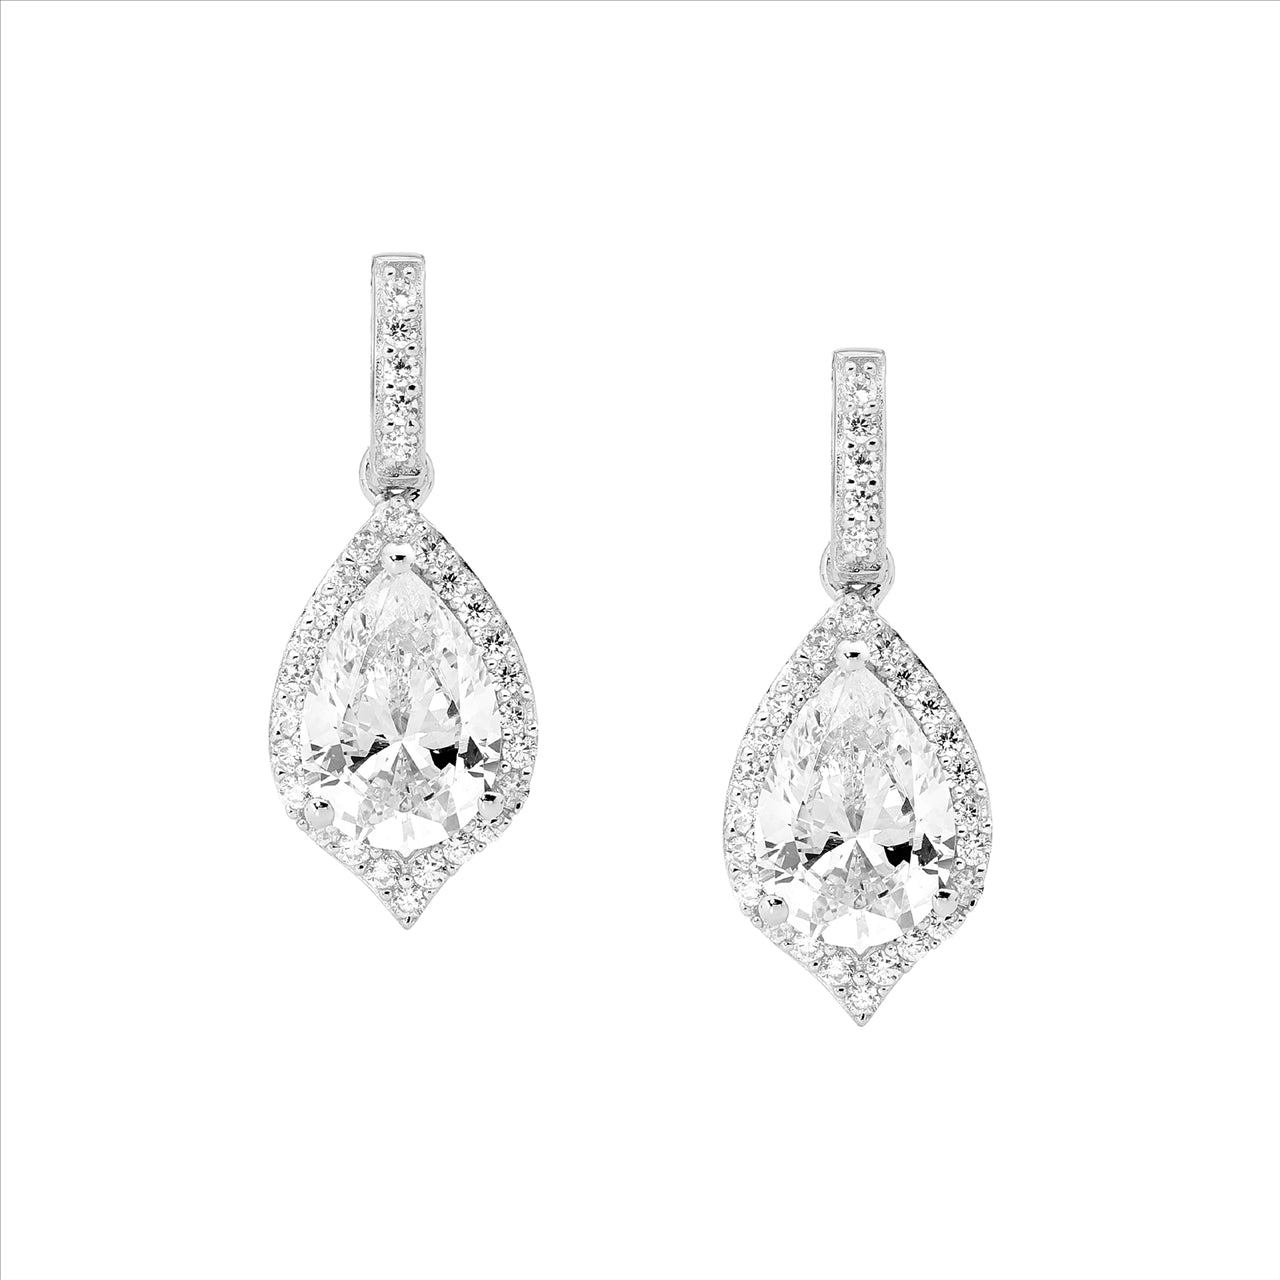 Ellani pear shaped cubic zirconia with cubic zirconia surround drop earrings in sterling silver